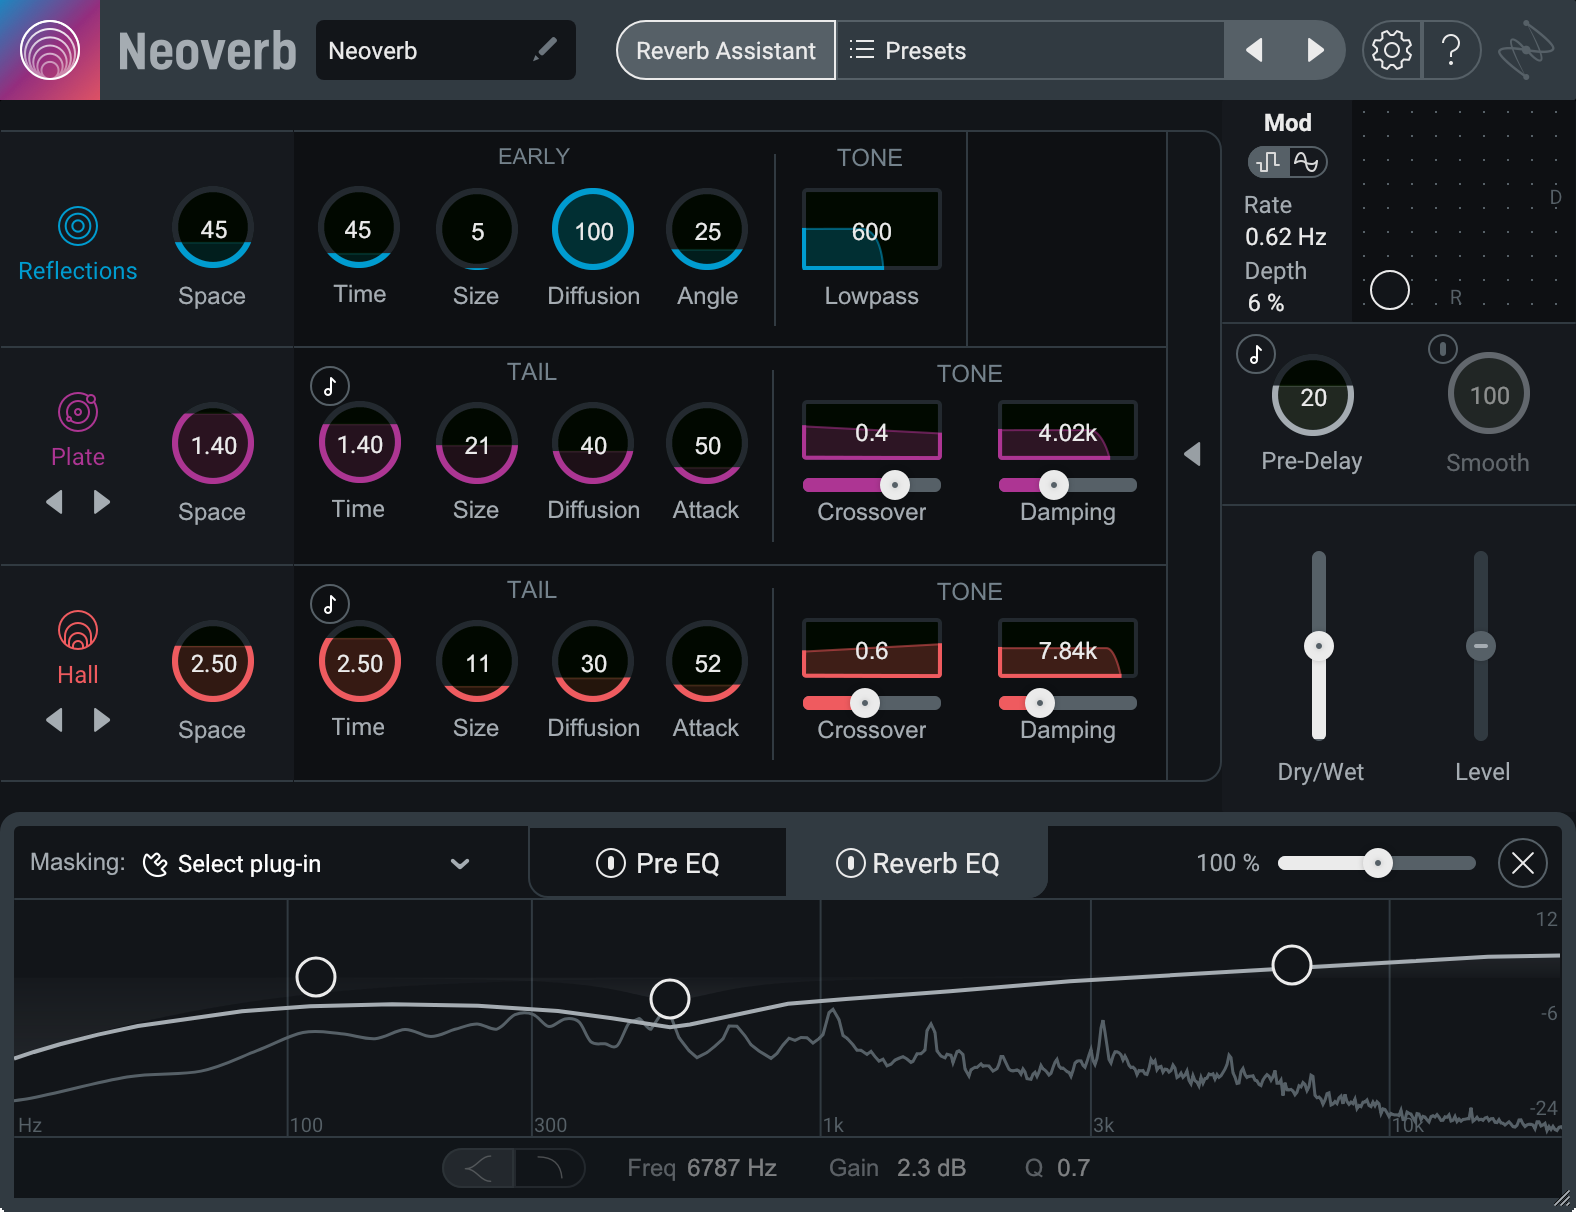 iZotope Neoverb 1.3.0 instal the new version for mac